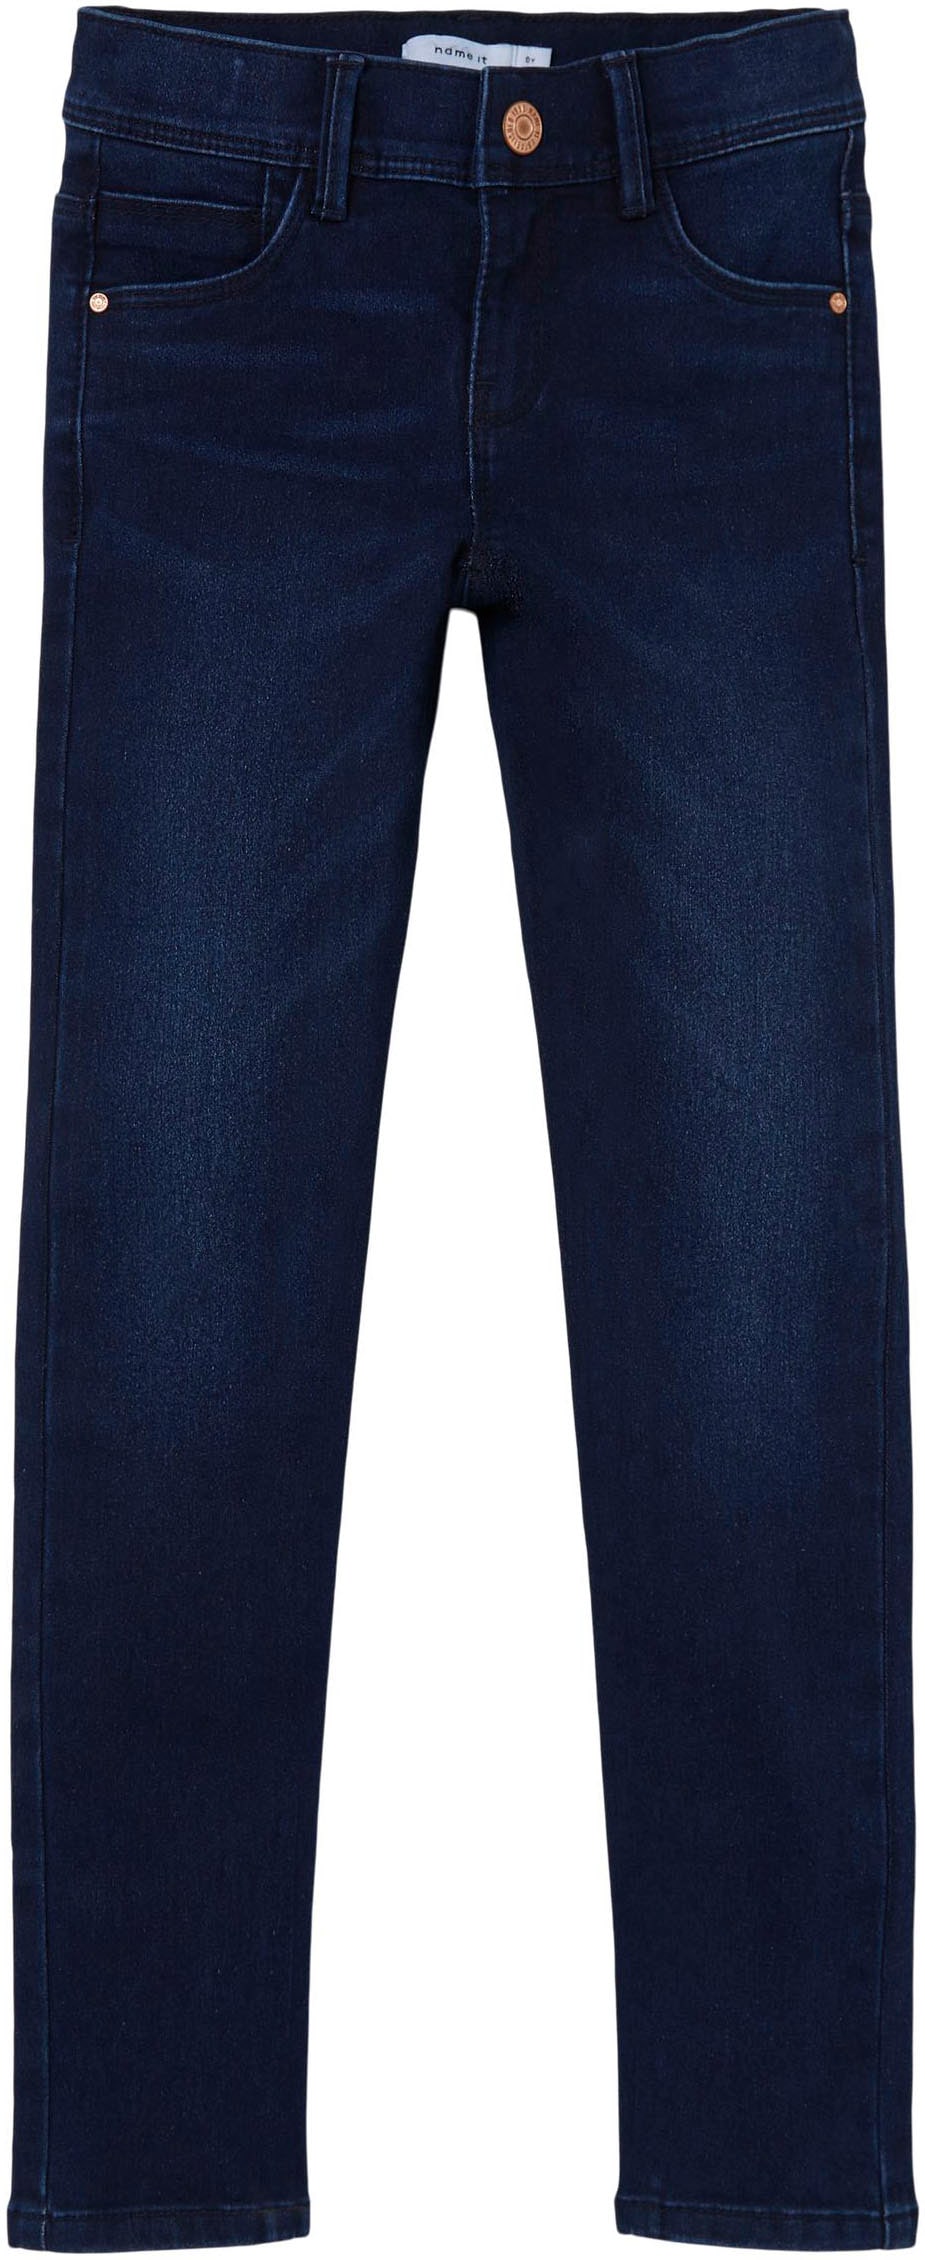 Name It Stretch-Jeans »NKFPOLLY DNMTAX bequemem ♕ PANT«, bei Stretchdenim aus